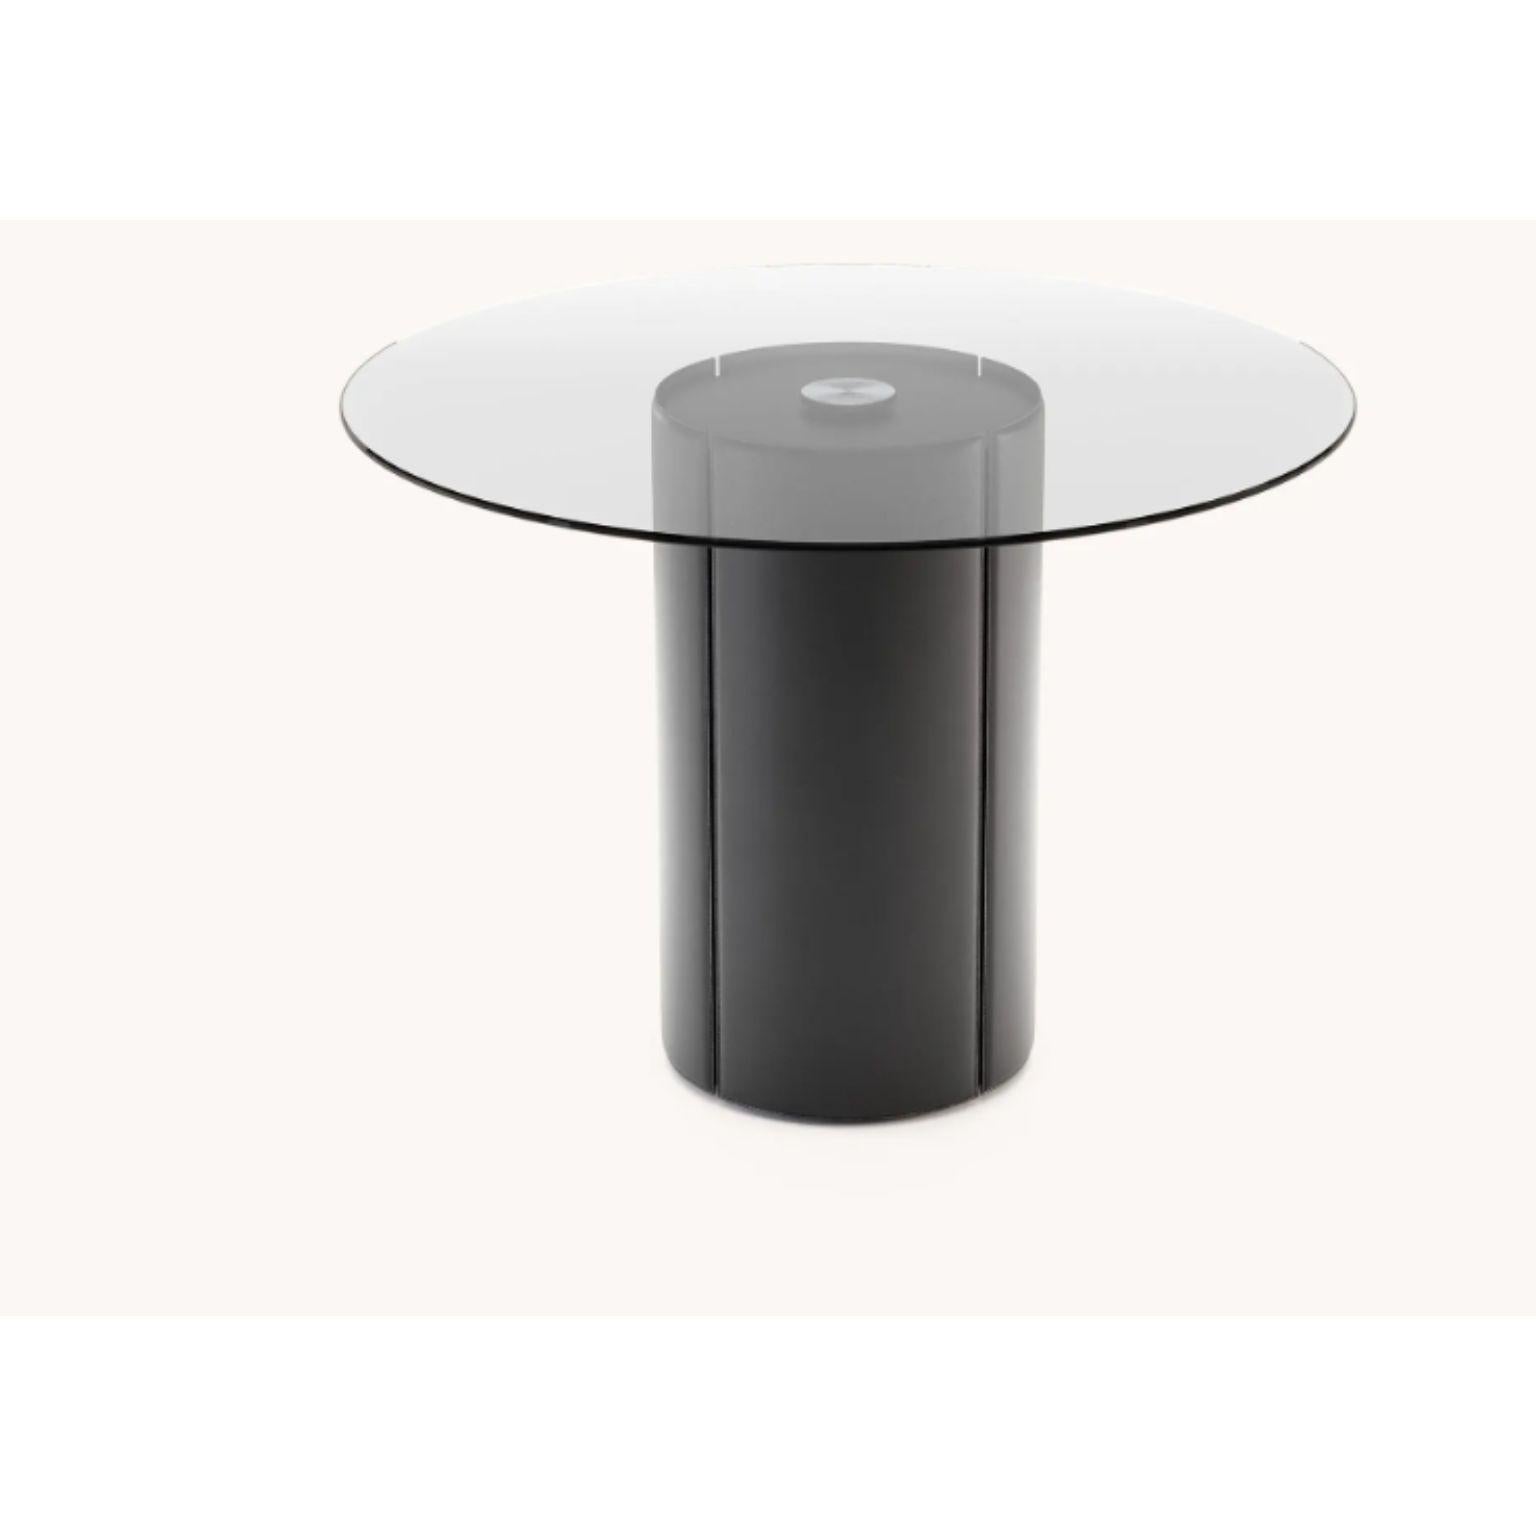 Round Mano dining table by Domkapa
Dimensions: W 140 x D 140 x H 75 cm.
Materials: Black lacquered matte, natural leather (Albany Black), smoked glass.
Also available in different materials.

With classic materials and an outstanding shape,